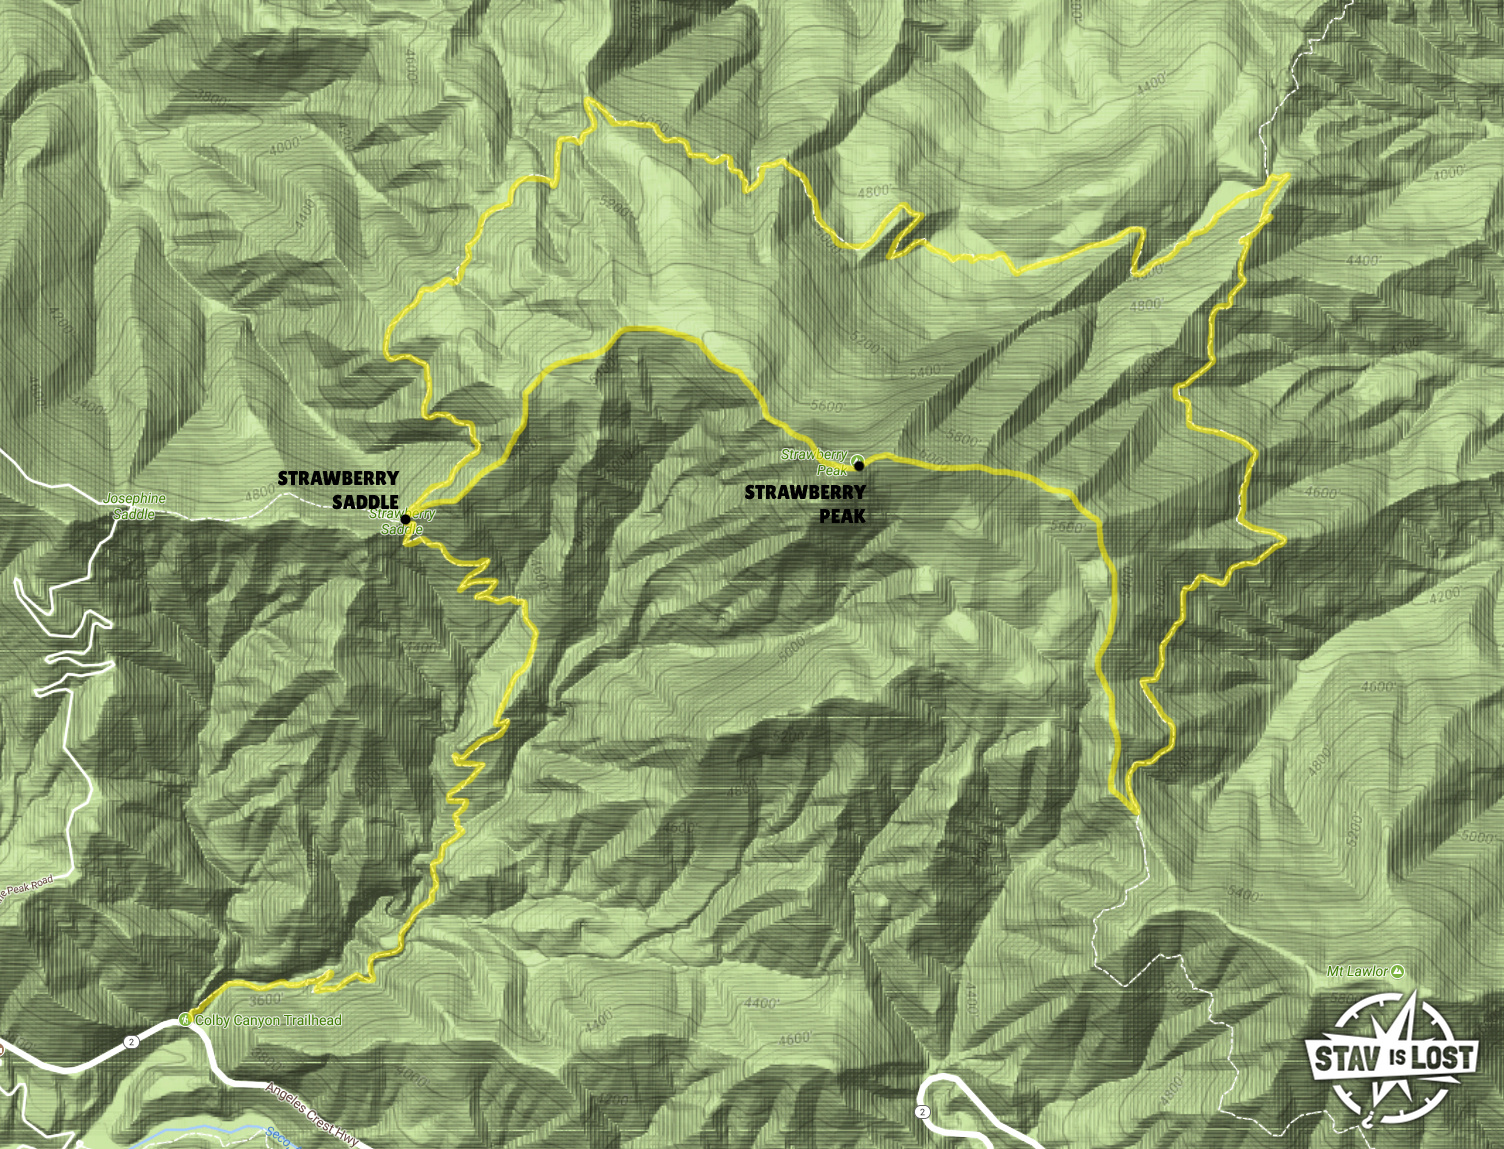 map for Strawberry Peak and Meadows via Colby Canyon by stav is lost